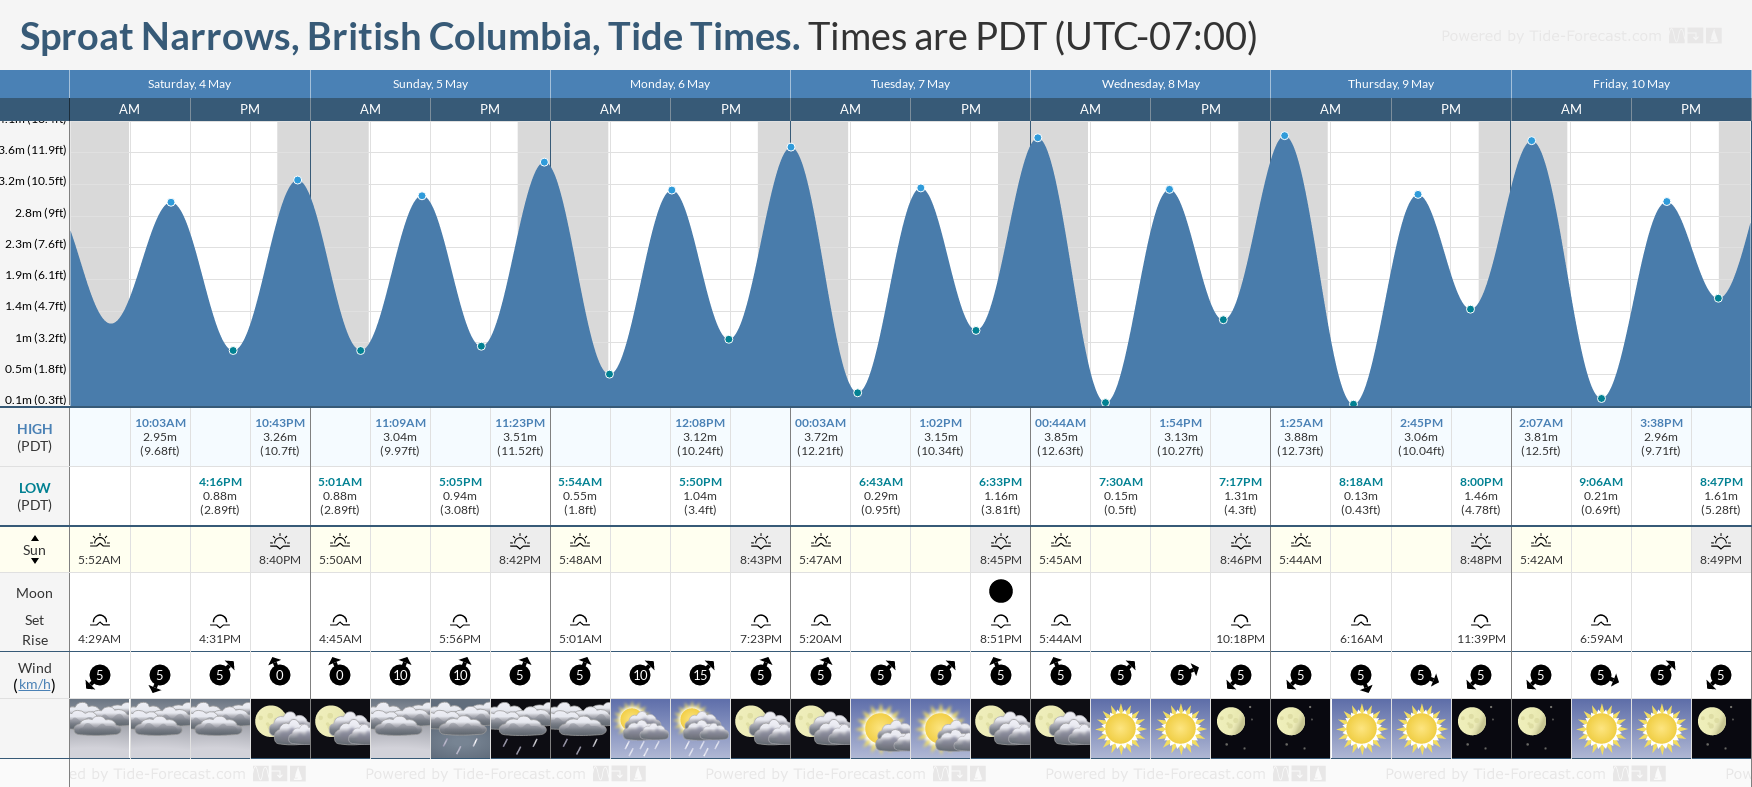 Sproat Narrows, British Columbia Tide Chart including high and low tide tide times for the next 7 days